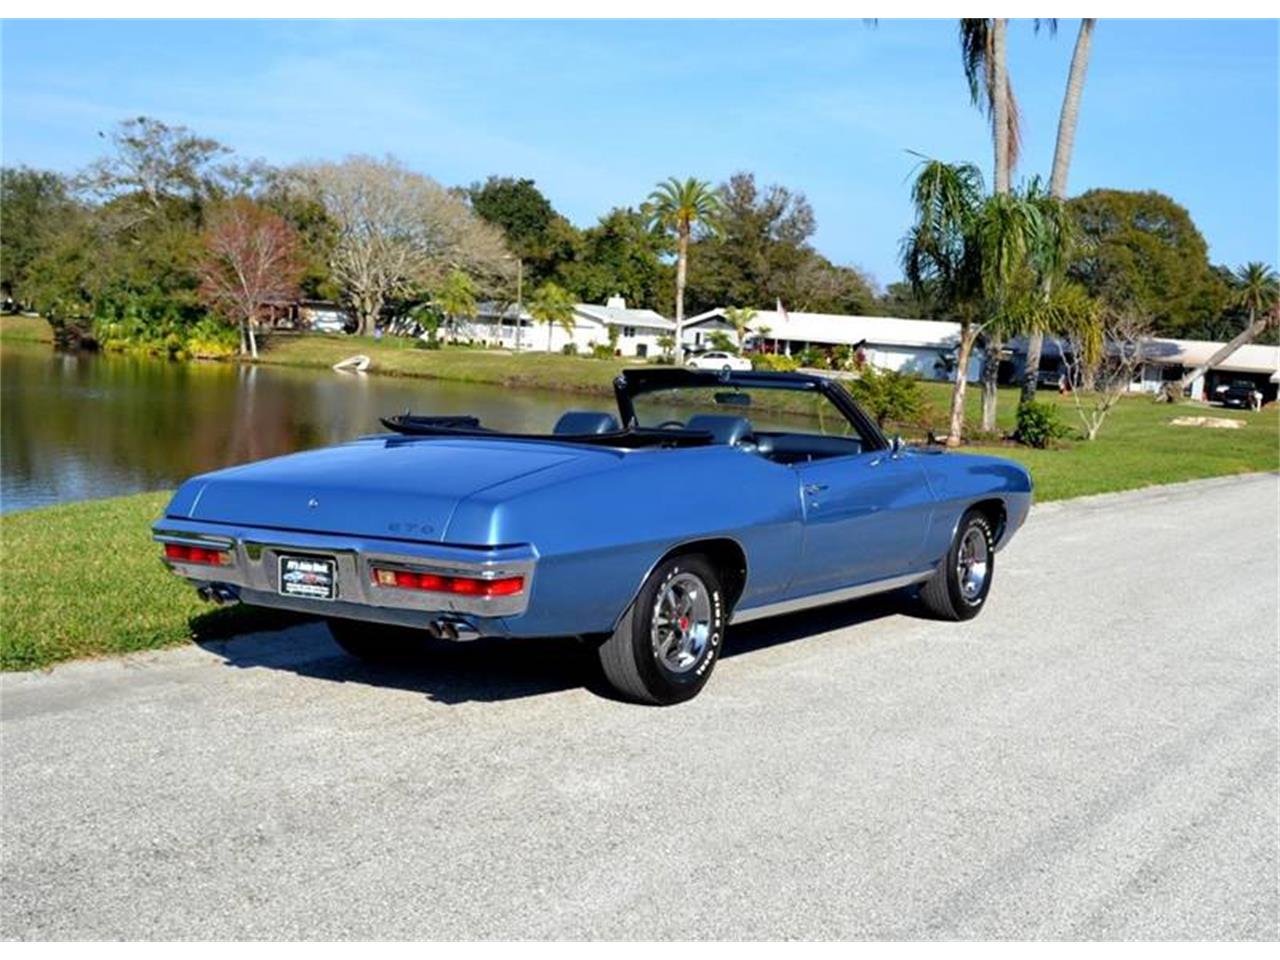 1970 Pontiac GTO for sale in Clearwater, FL ...